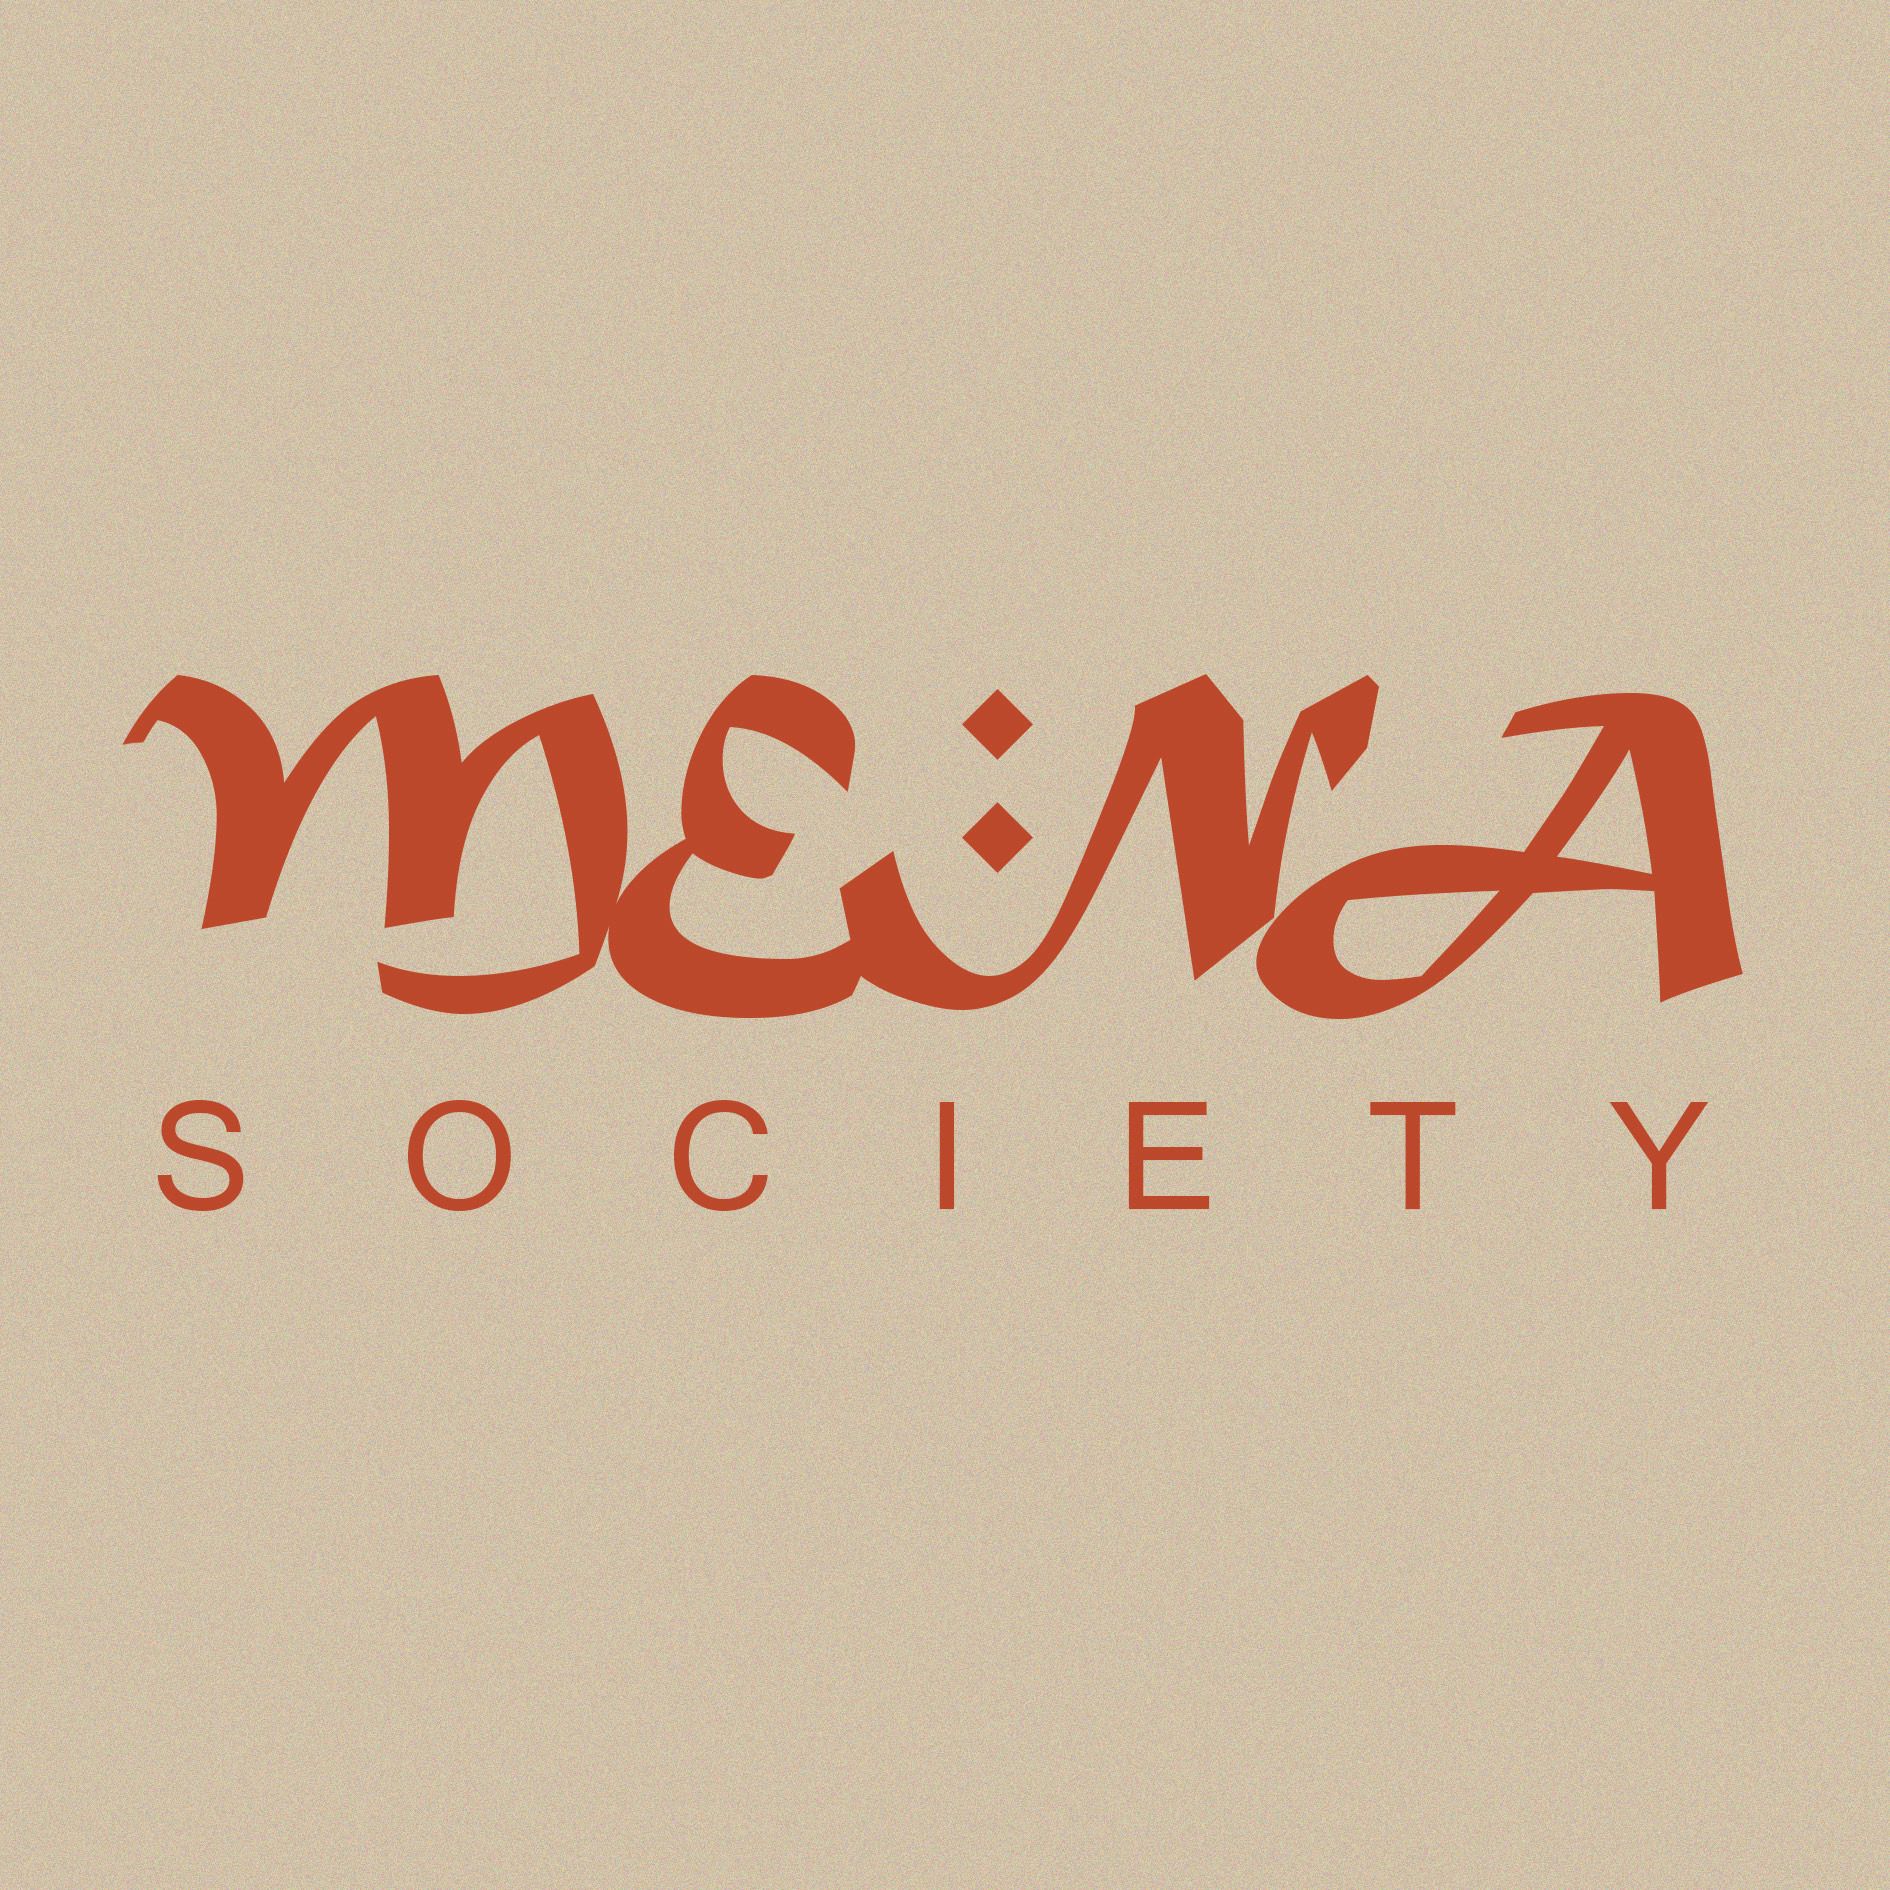 Logo of Middle Eastern, North African Society (MENA)